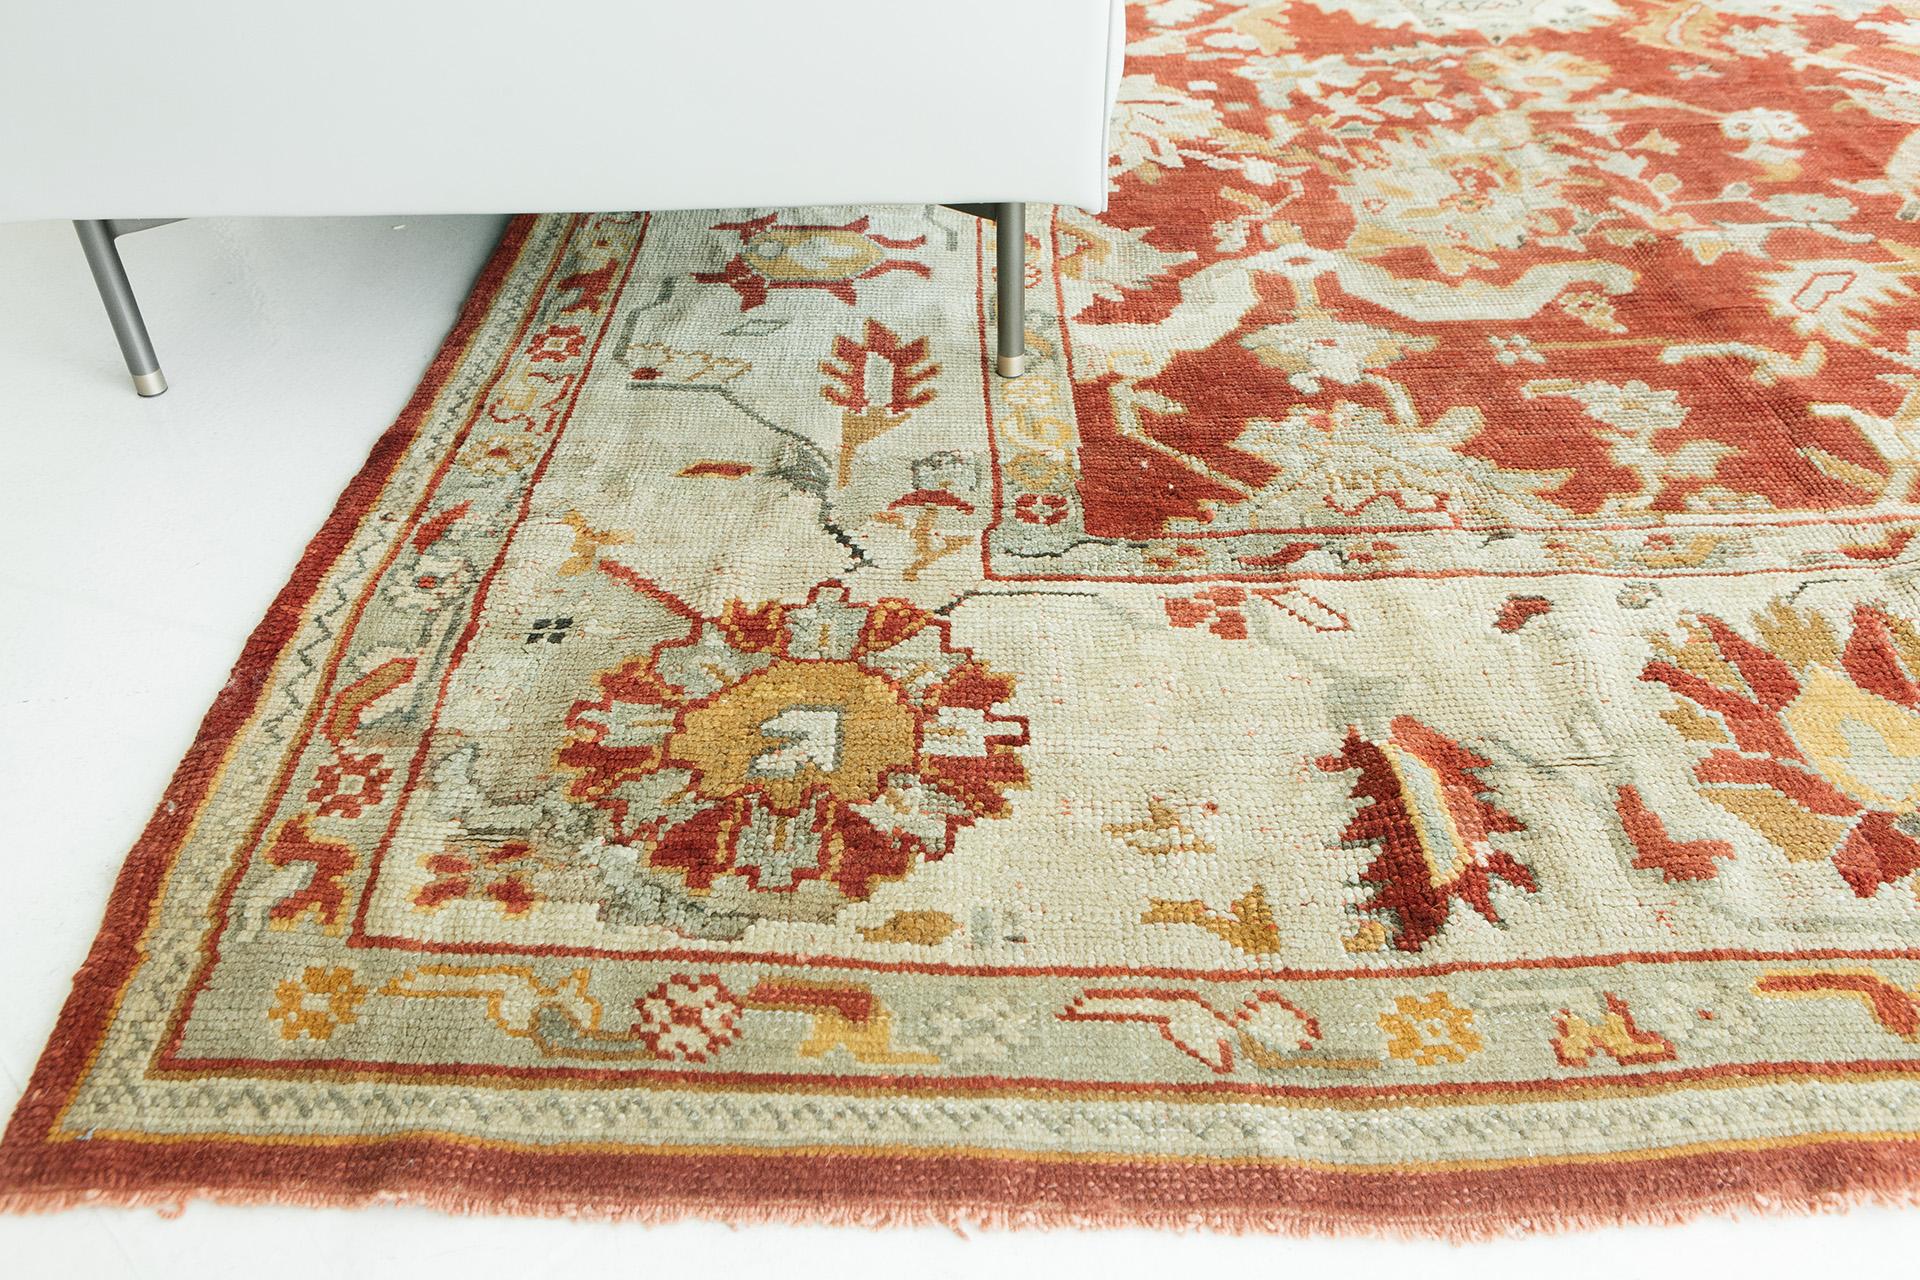 Vivid colors of red, apricot, natural white and eggshell blue are woven through this soft and lustrous wool. This highly decorative hand woven rug is from the late 19th century. 






Rug number 17100
Size 11' 9